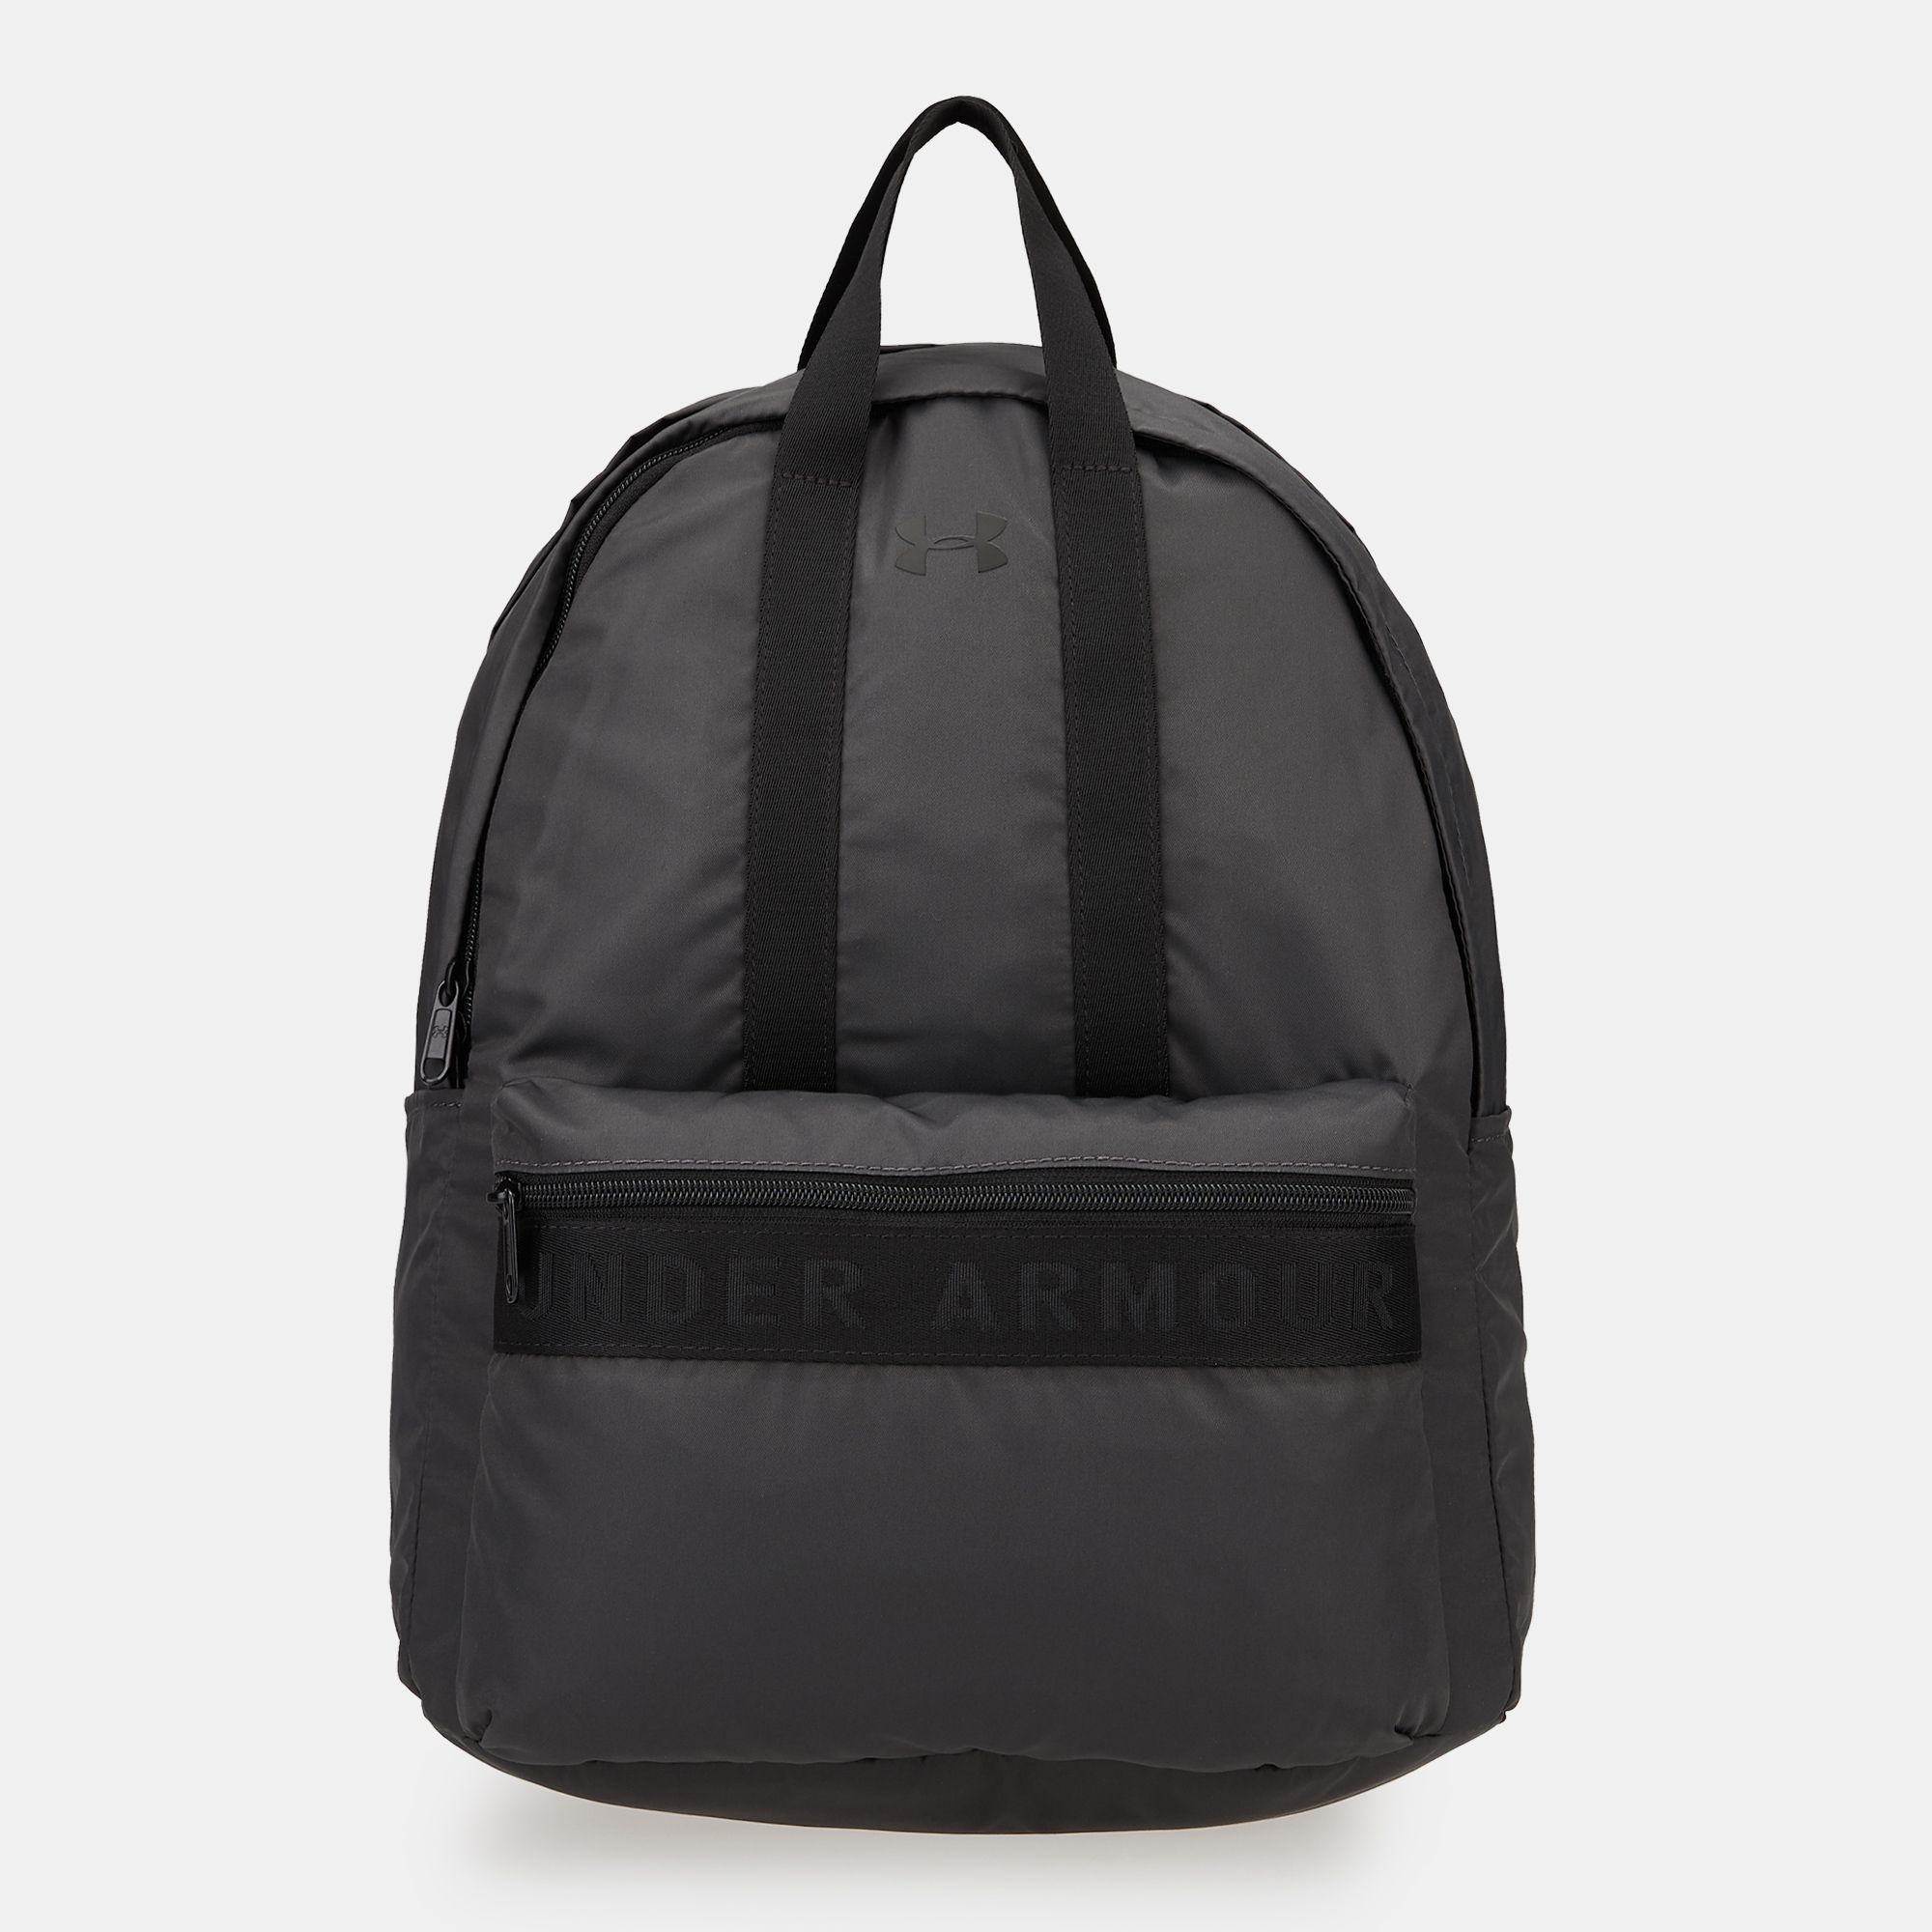 Under Armour Women's Favorite Backpack 